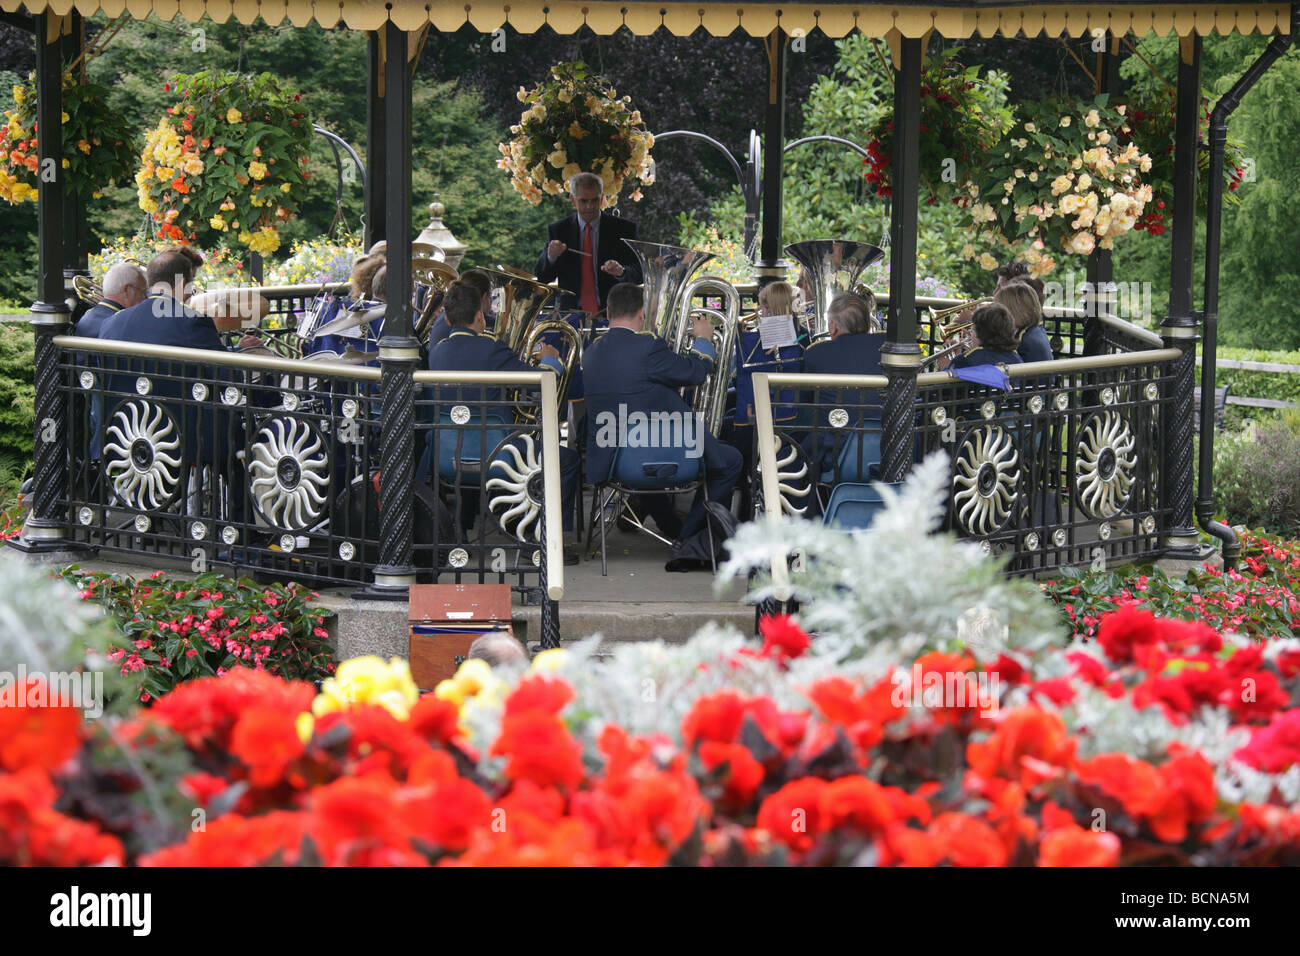 City of Truro, England. Flower beds in full bloom in Victoria Gardens, with a brass band playing in the Victorian bandstand. Stock Photo